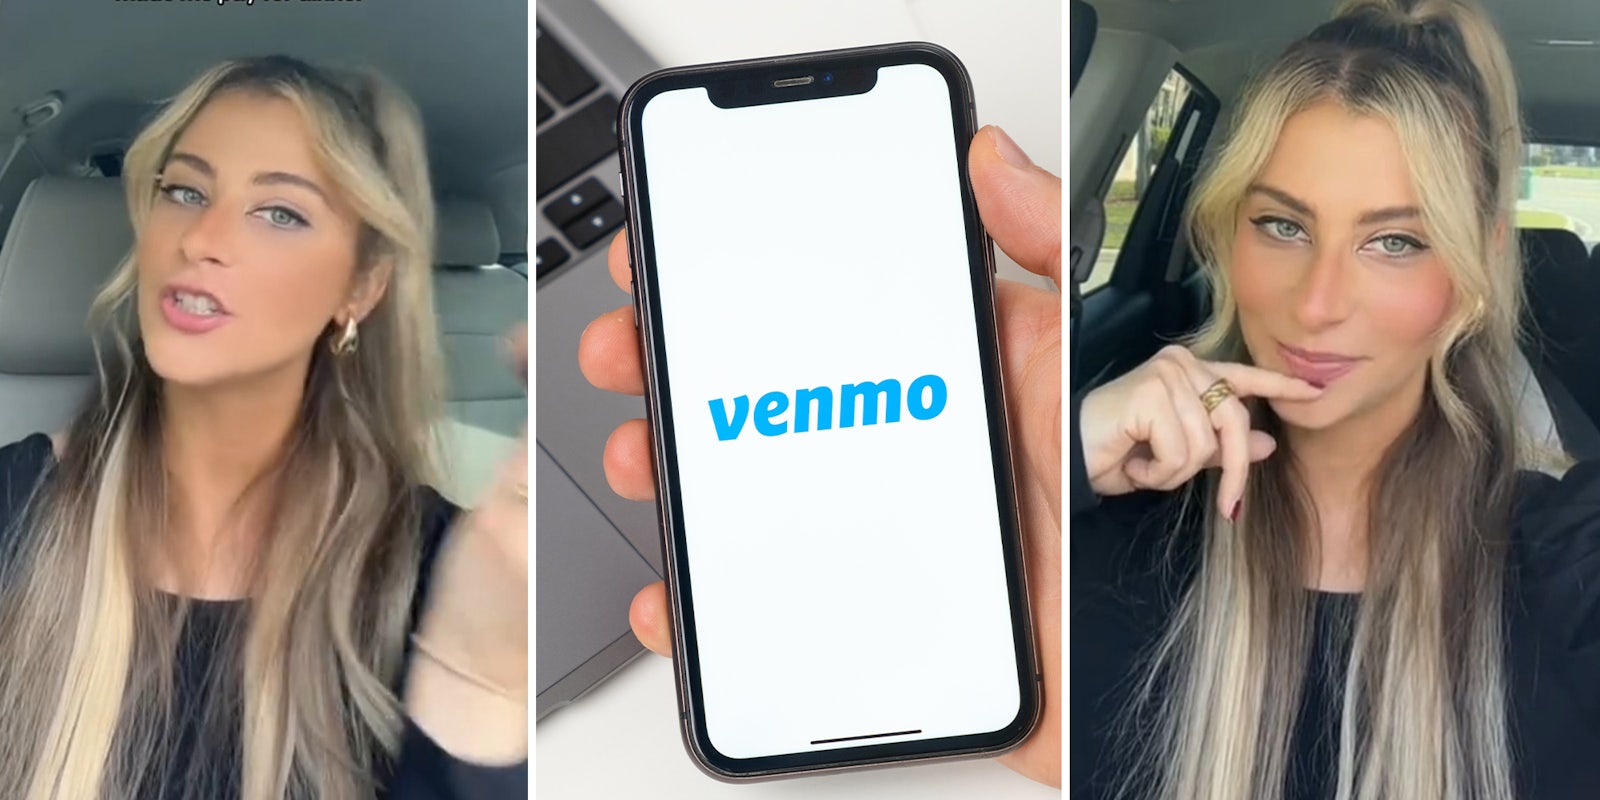 Woman goes on date with entrepreneur who forgets his wallet and needs dinner, gas, parking. But offers to Venmo